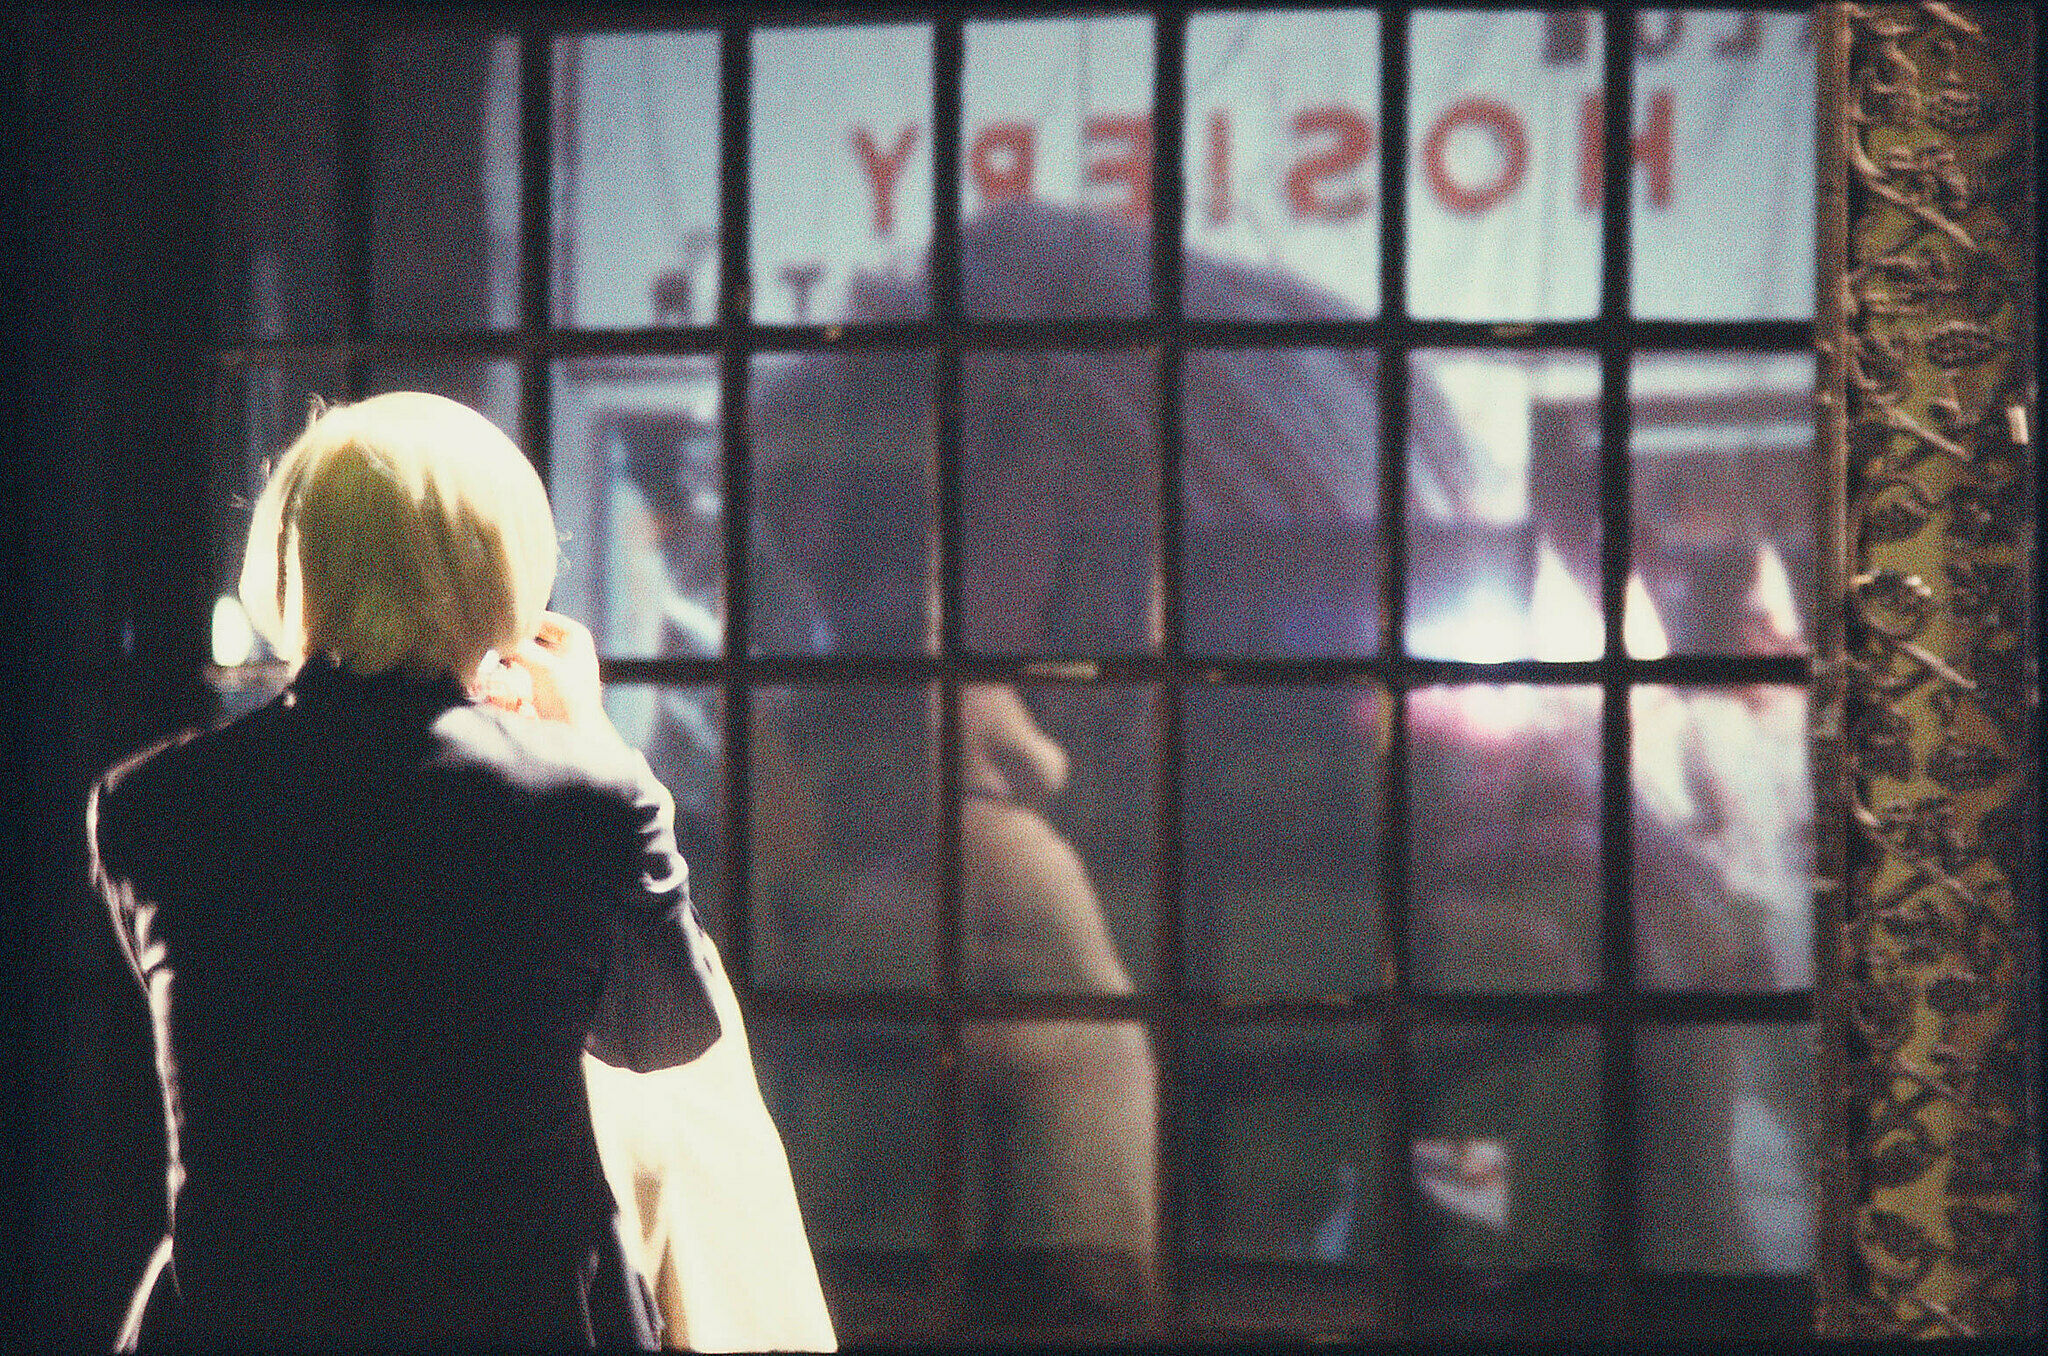 An artwork featuring Andy Warhol looking out the window.